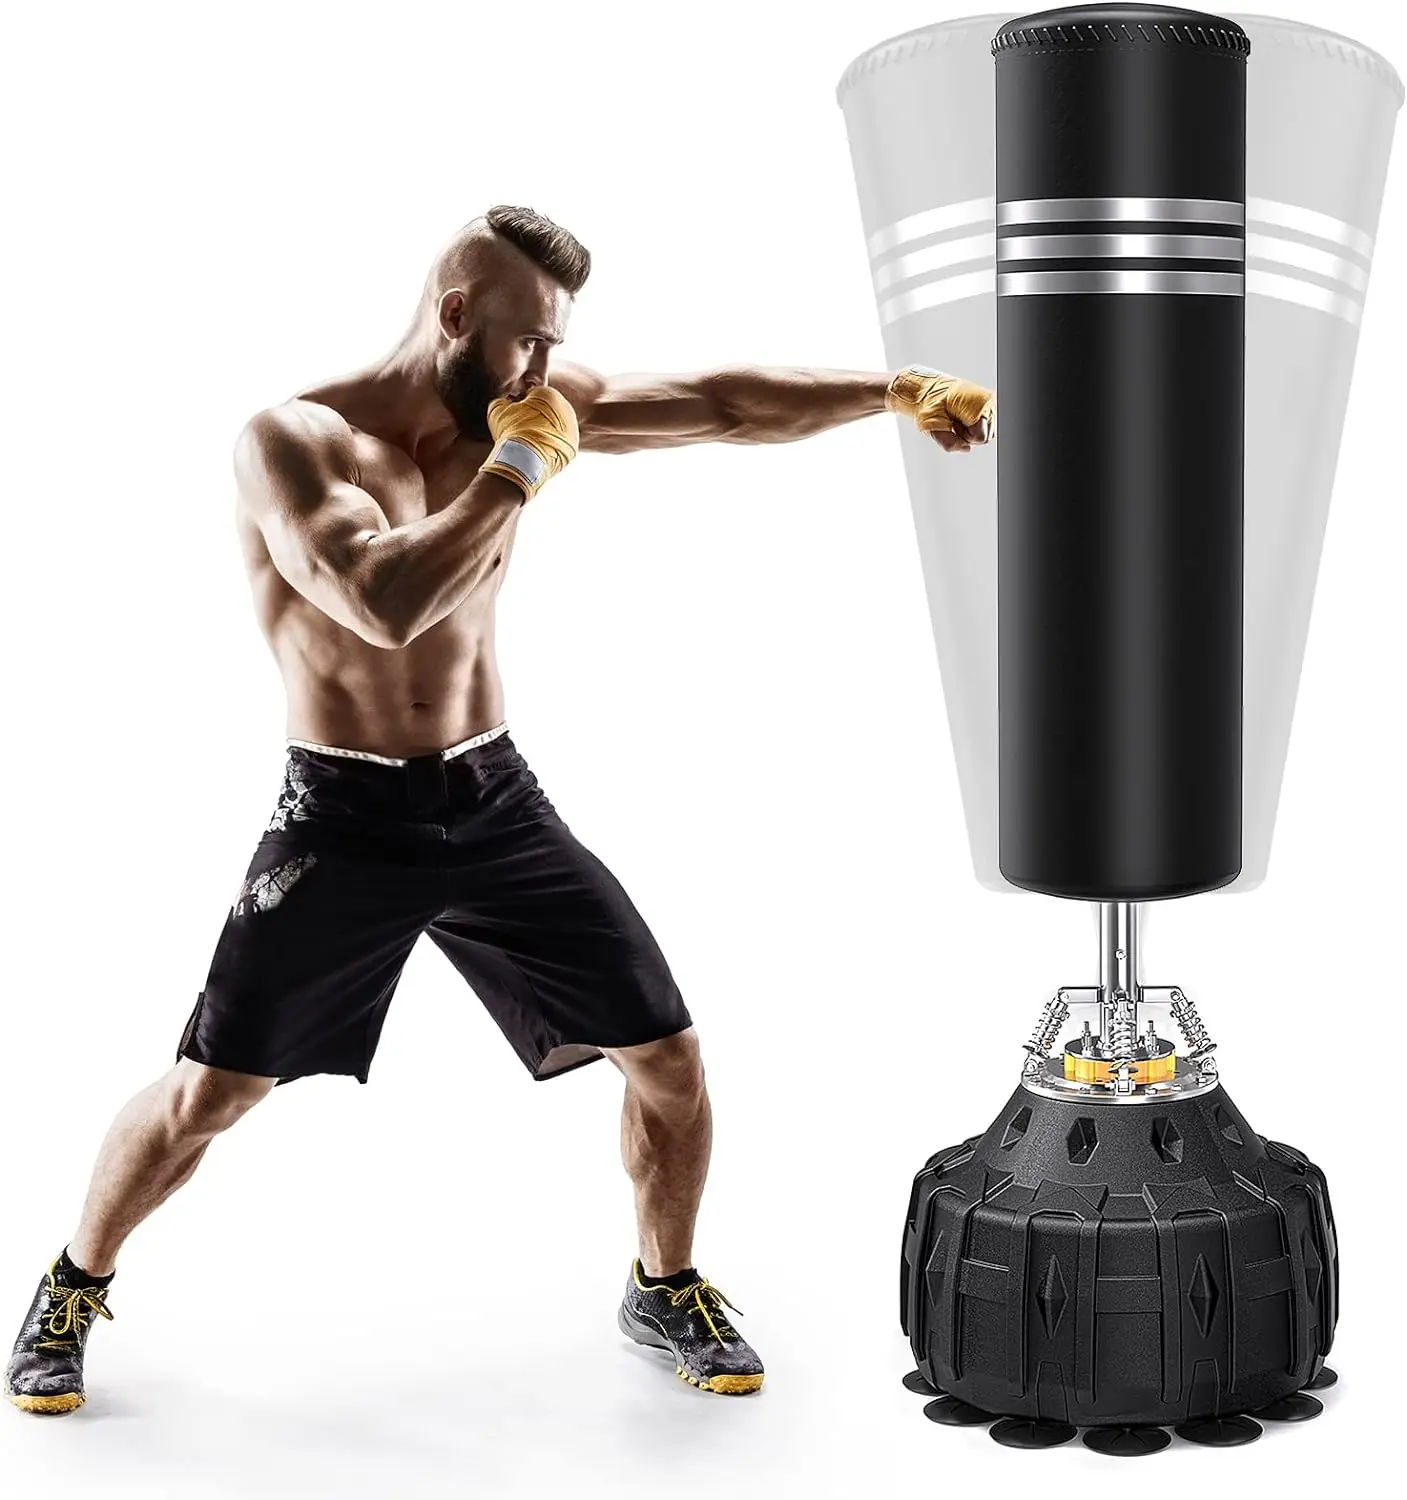 

Bag Heavy Boxing Bag with Suction Cup Base - Freestanding Punching Bag for Adults Kickboxing Bags Kick Punch Bag 70'' Ta Nunchuc